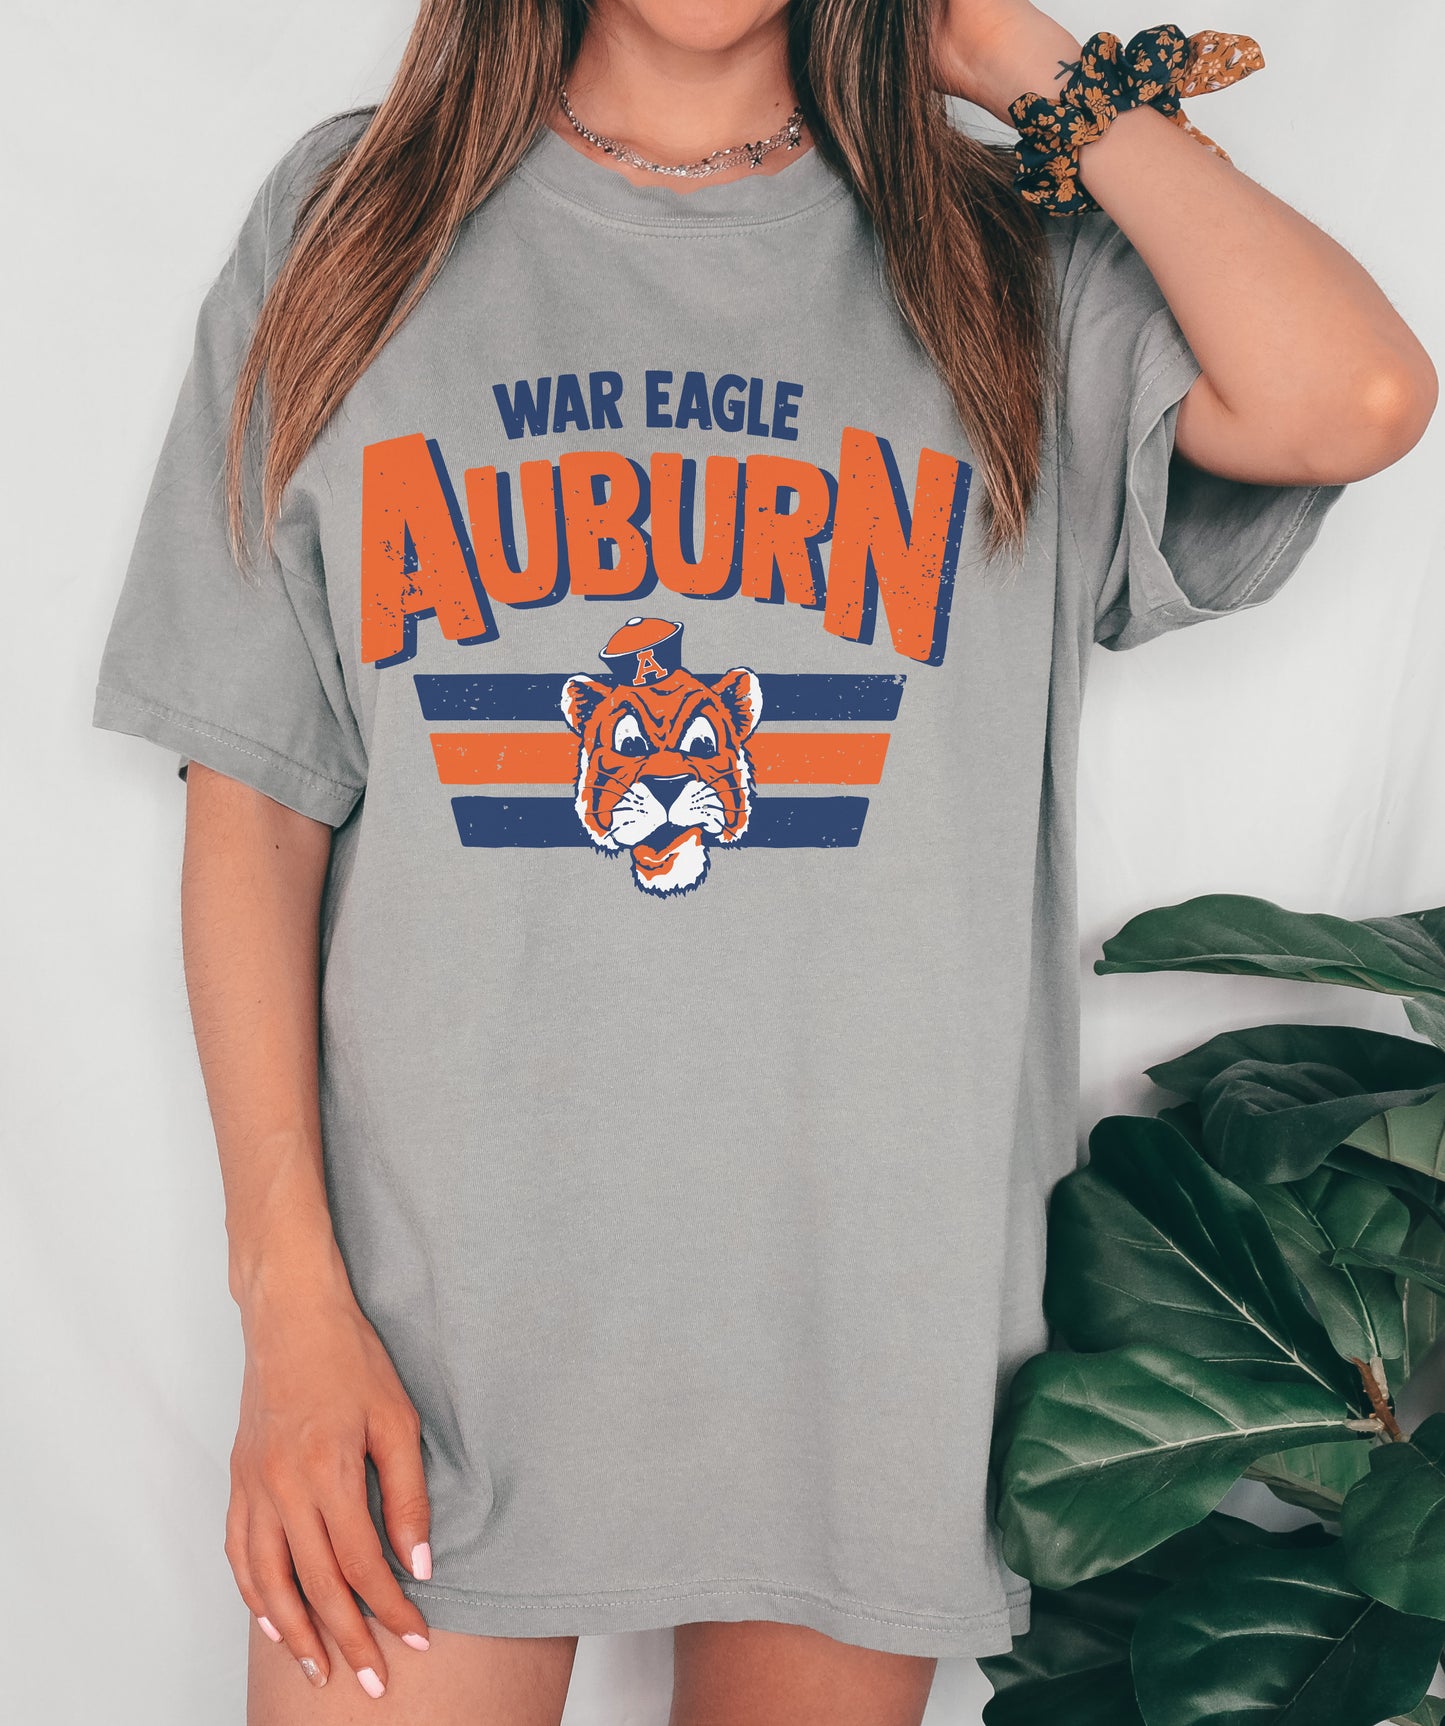 SPIRIT DROP - Let's Go Tigers - Comfort Colors Youth and Adult Sizes